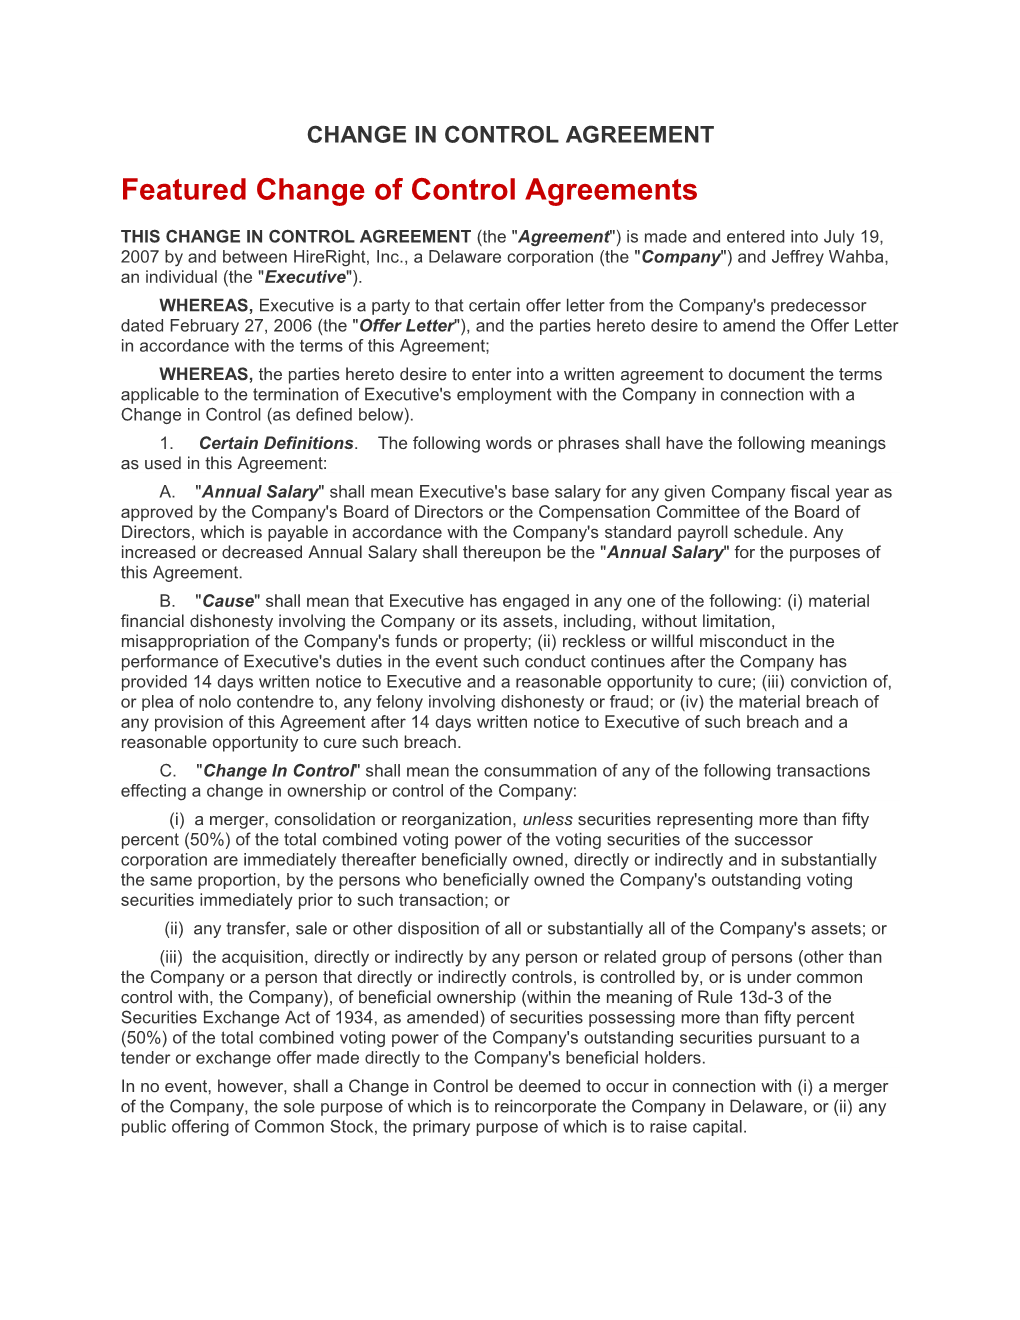 Featured Change of Control Agreements